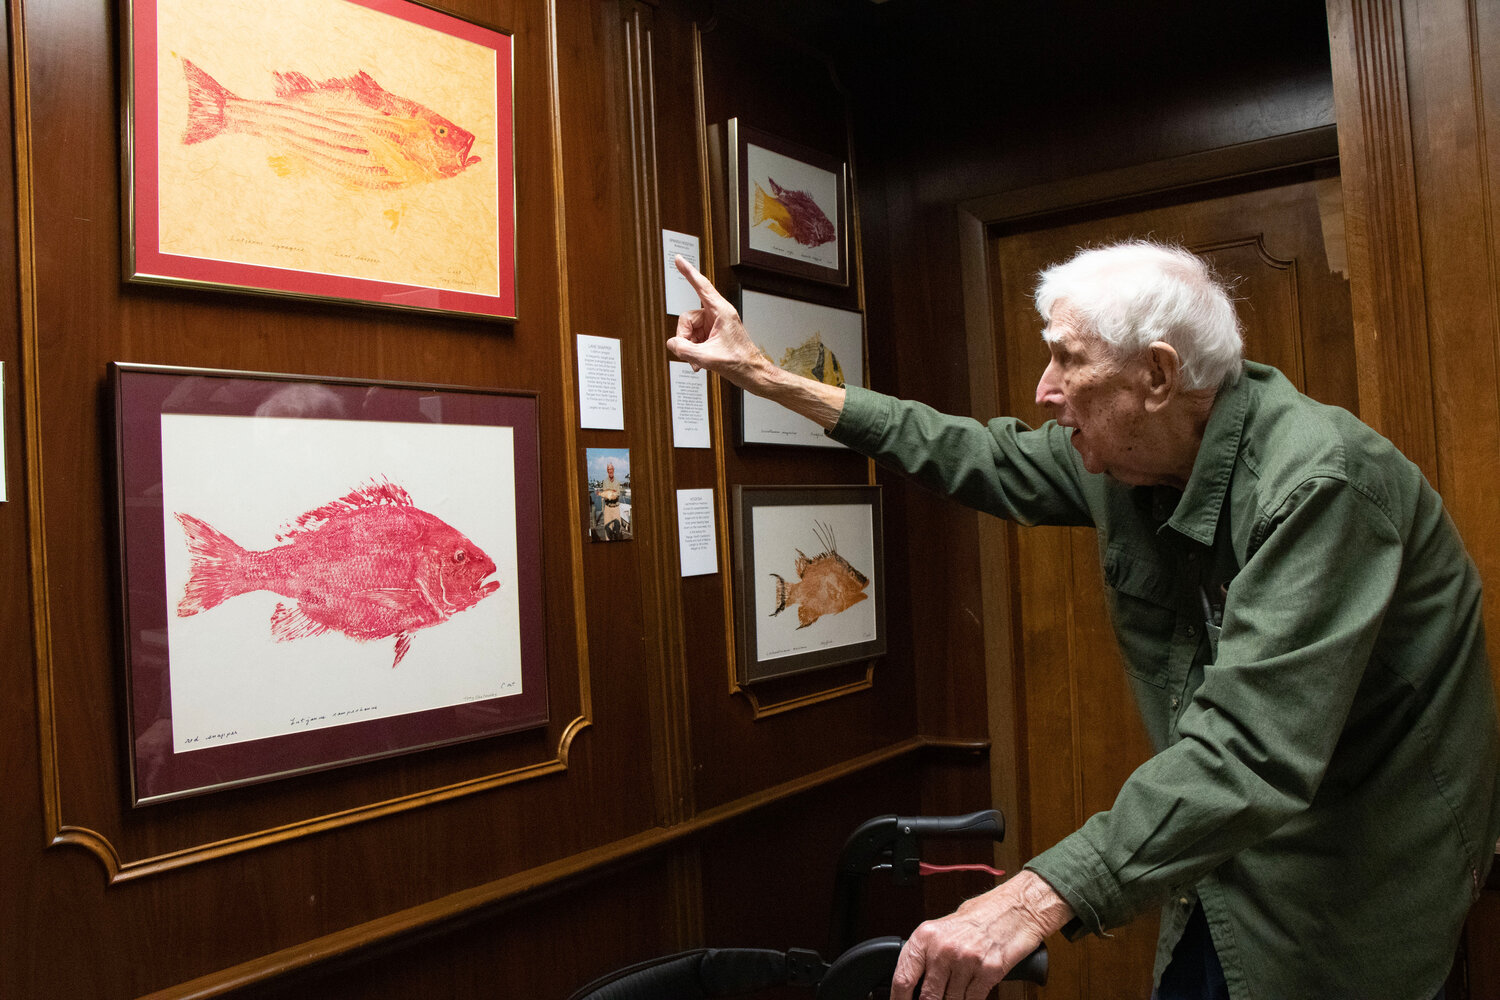 Tony Chatowsky points to a Gyotak print of a lane snapper he caught and which hangs in his new Fish Print Museum. “I like to show people fish they’re not familiar with,” he said.